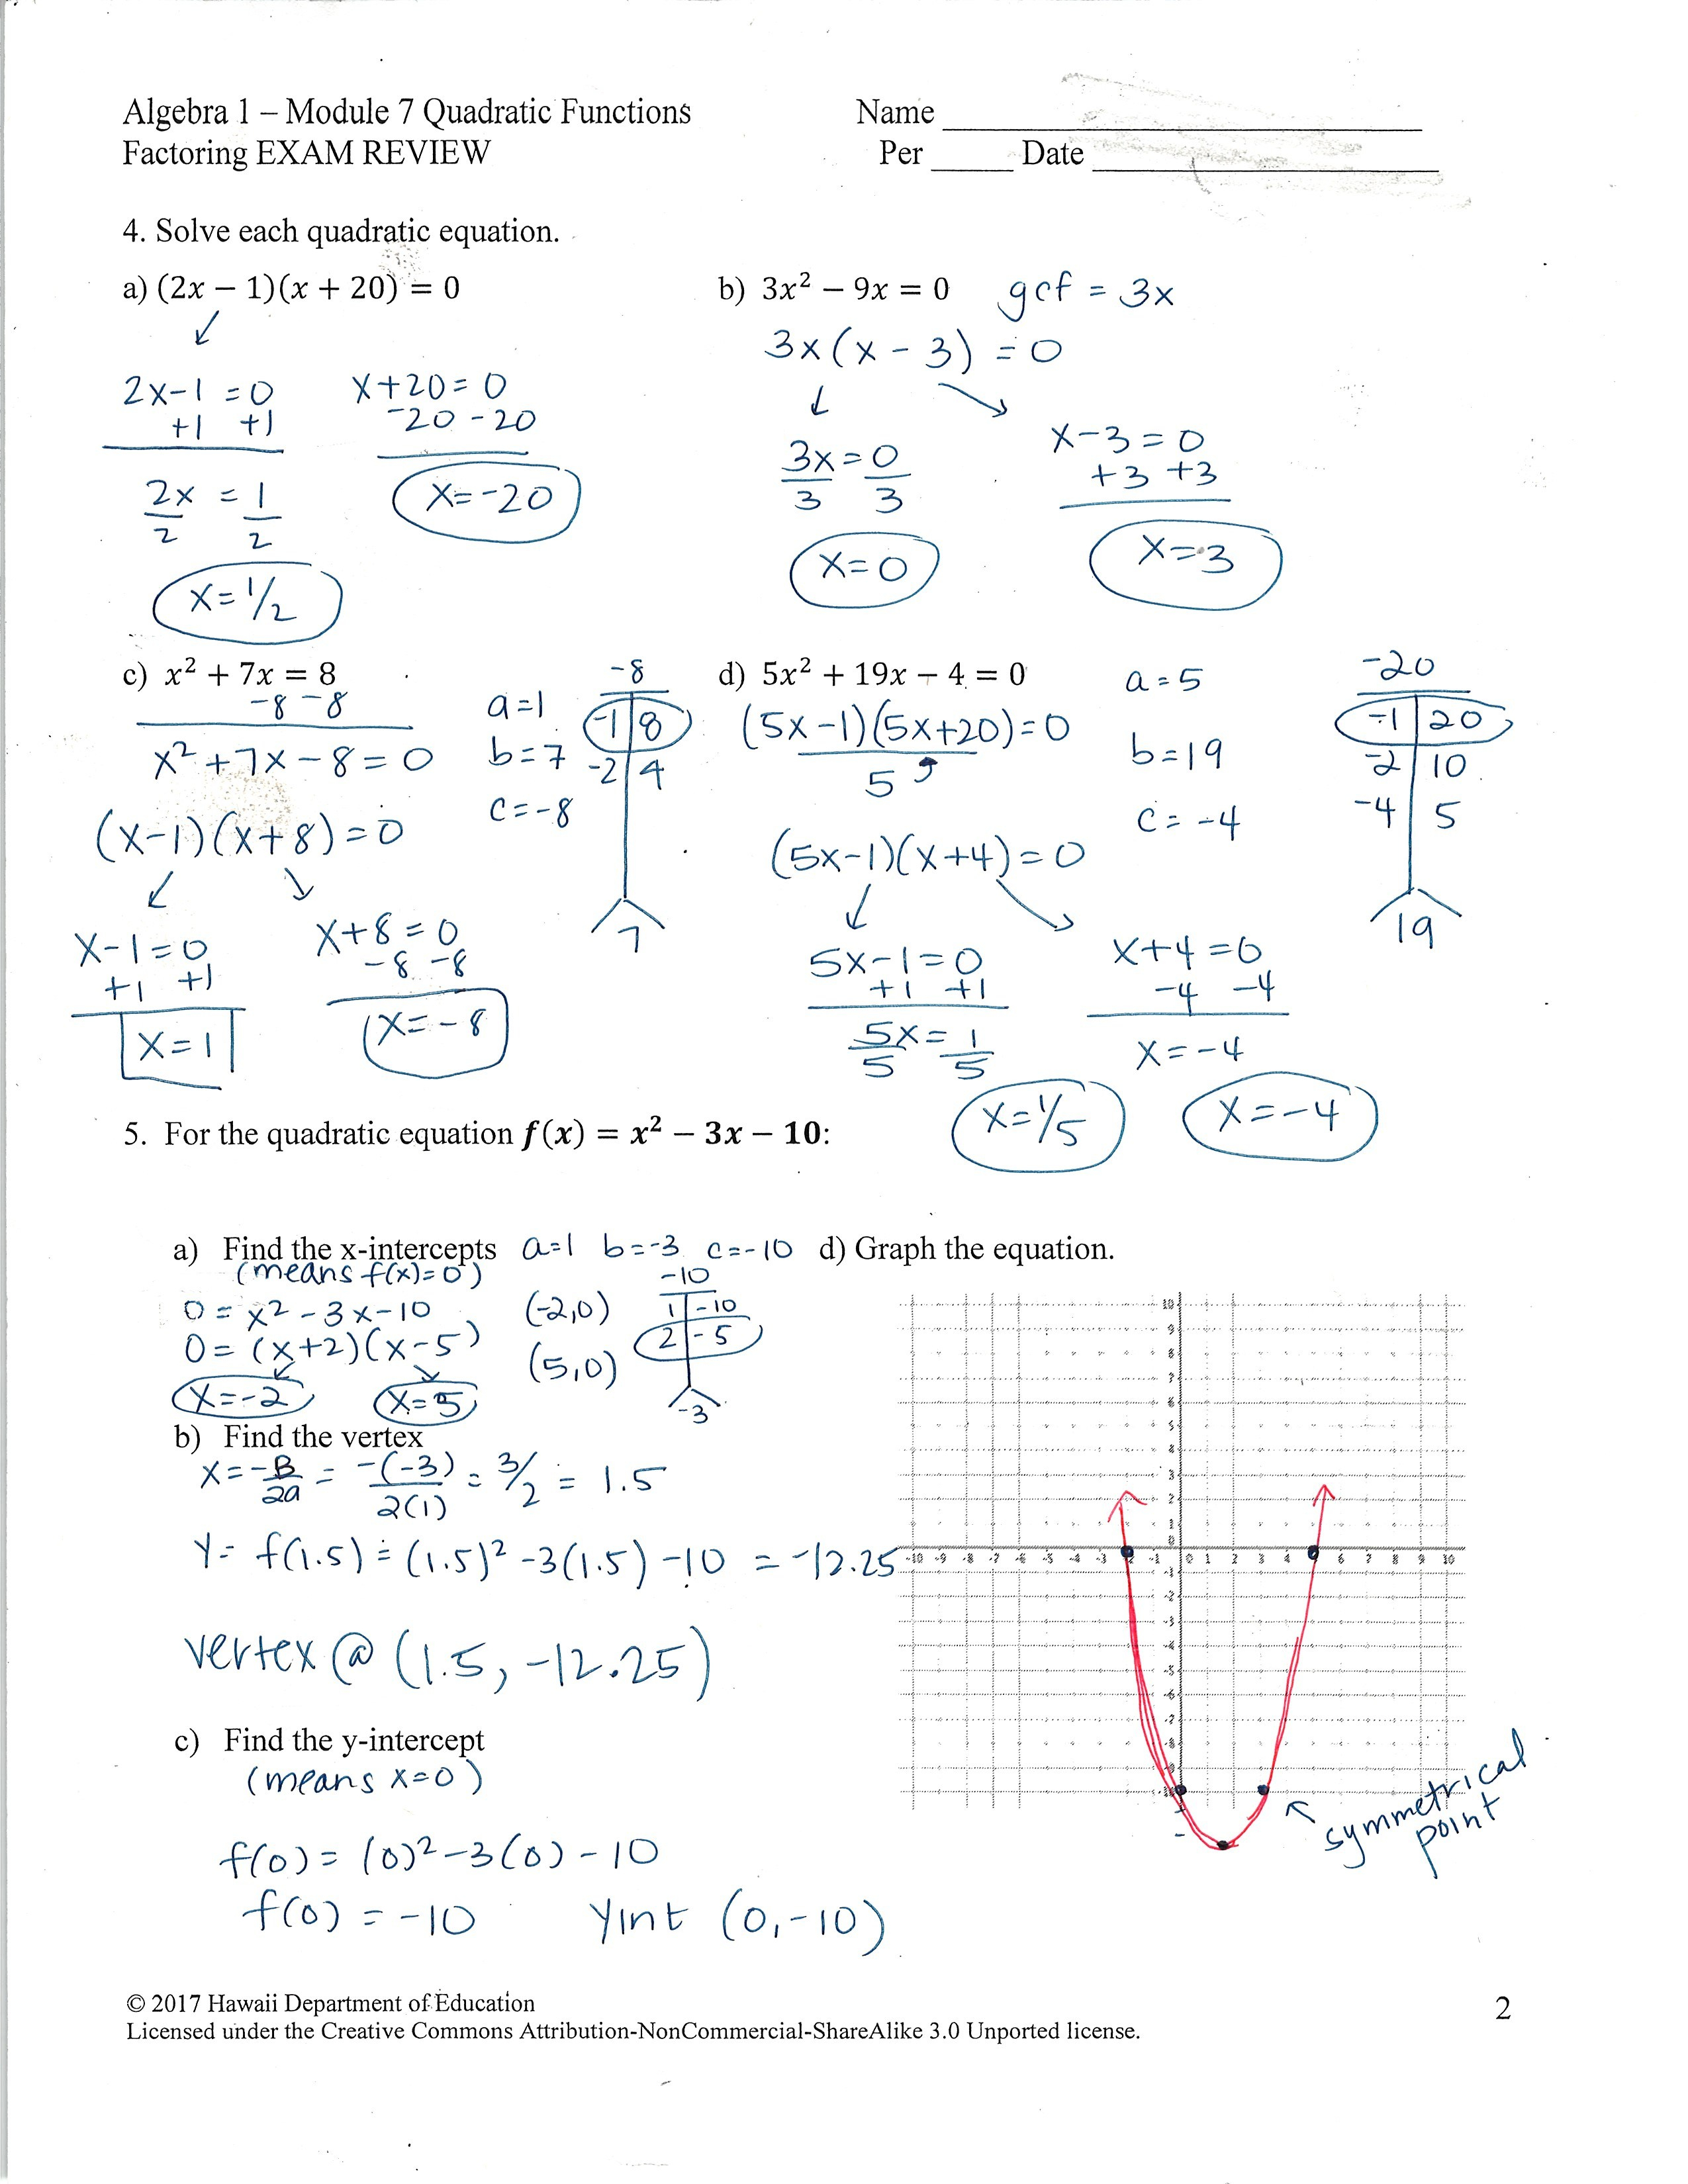 solving quadratic equations by graphing practice worksheet